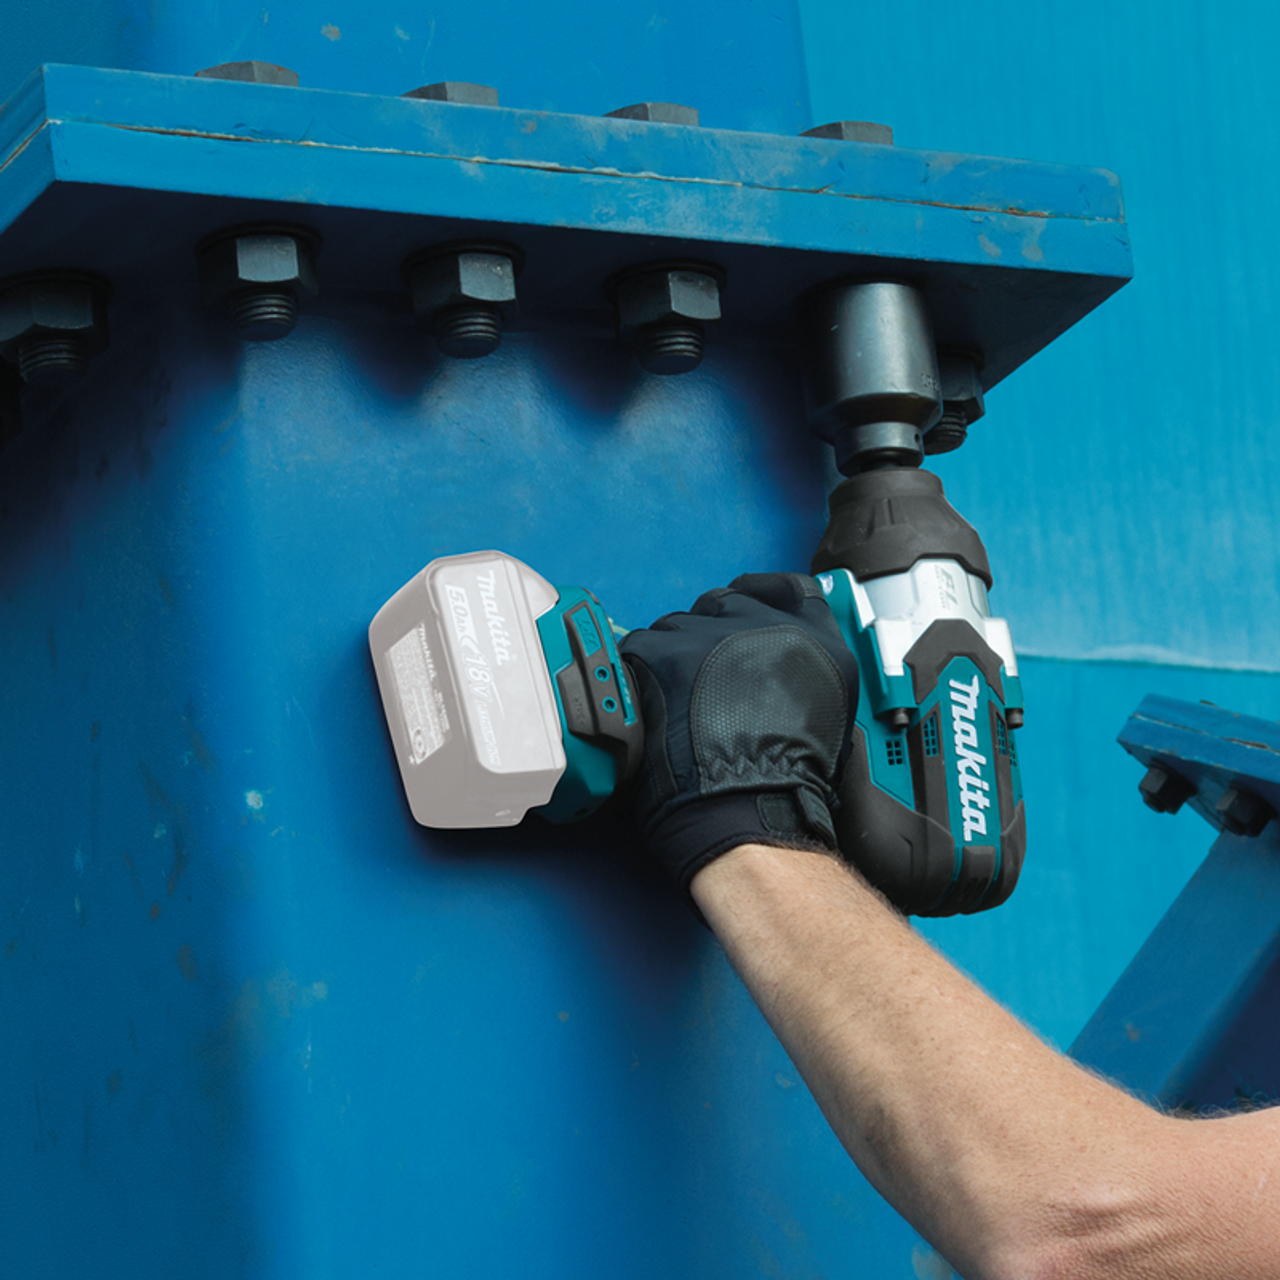 18V LXT? Lithium-Ion Brushless Cordless High-Torque 1/2" Sq. Drive Utility Impact Wrench, Tool Only, XWT08XVZ